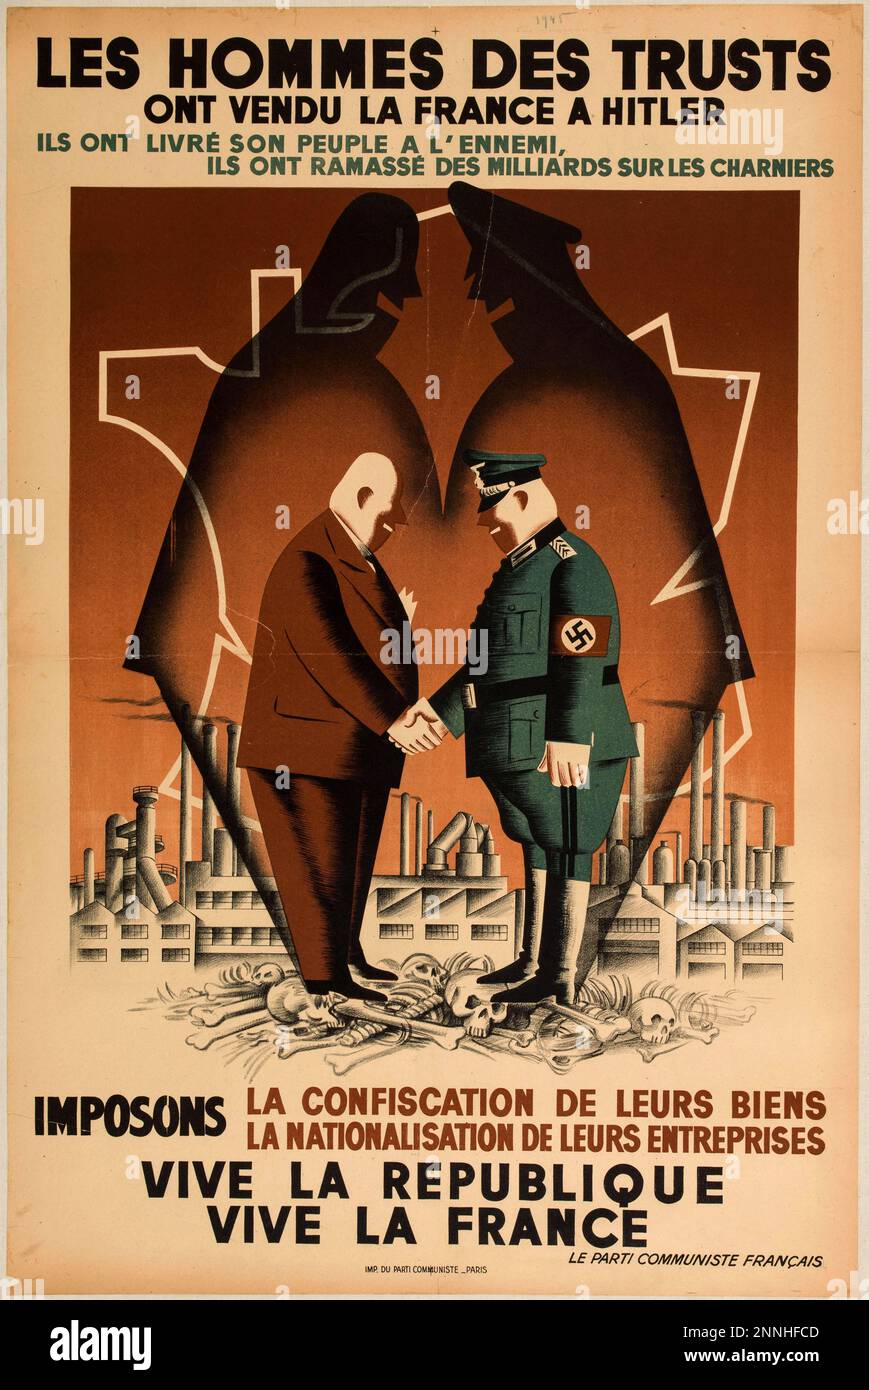 1945 poster of the French Communist Party, claiming that 'the men of the trusts sold the country to Hitler,' and urging that their wealth be confiscated and their businesses nationalised; this did not happen. Stock Photo